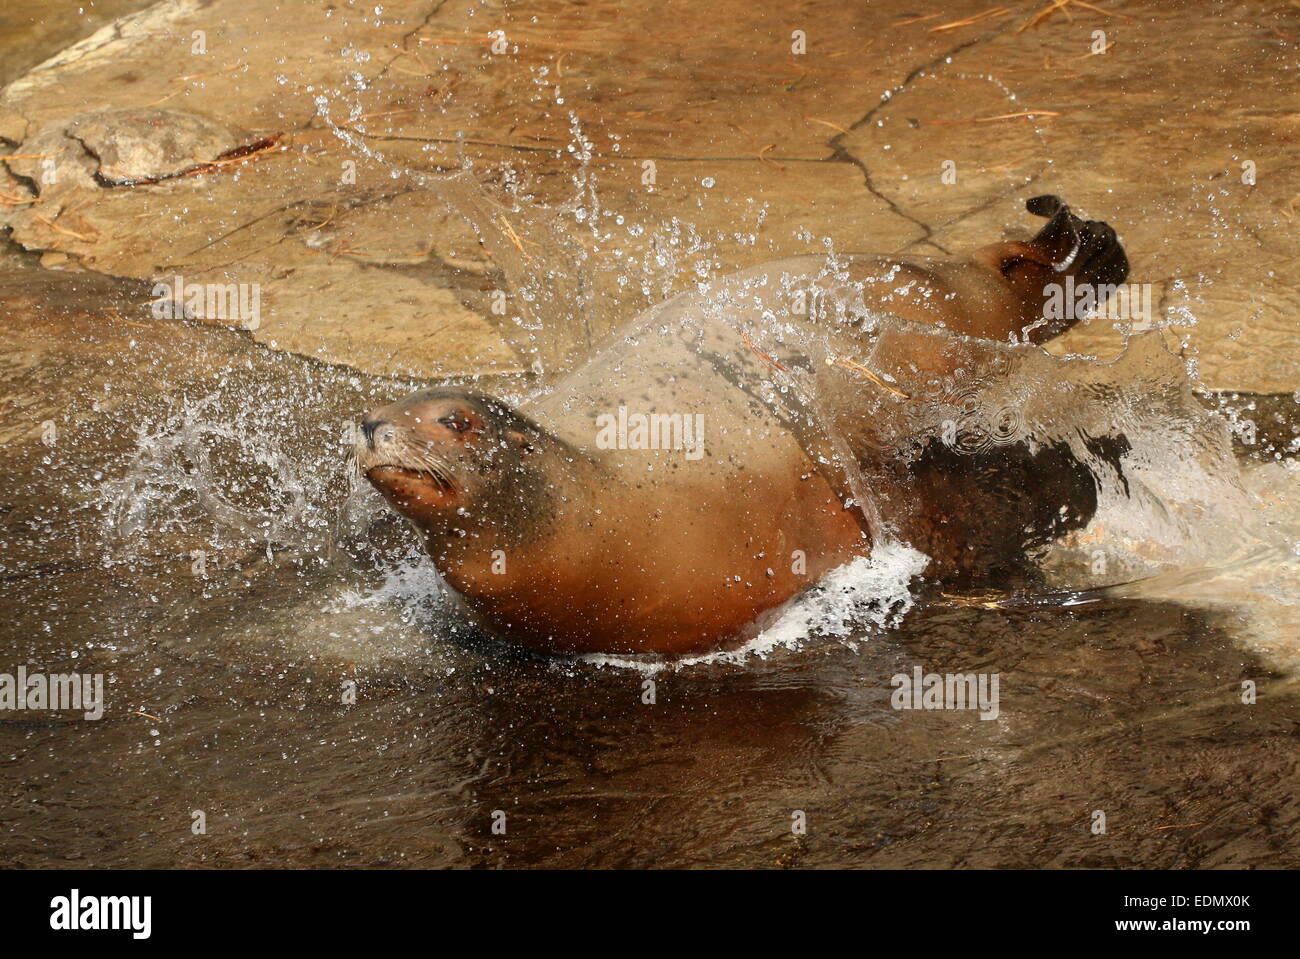 Female California sea lion (Zalophus californianus) splashing wildly in the water on a rocky coast as she enters the water Stock Photo